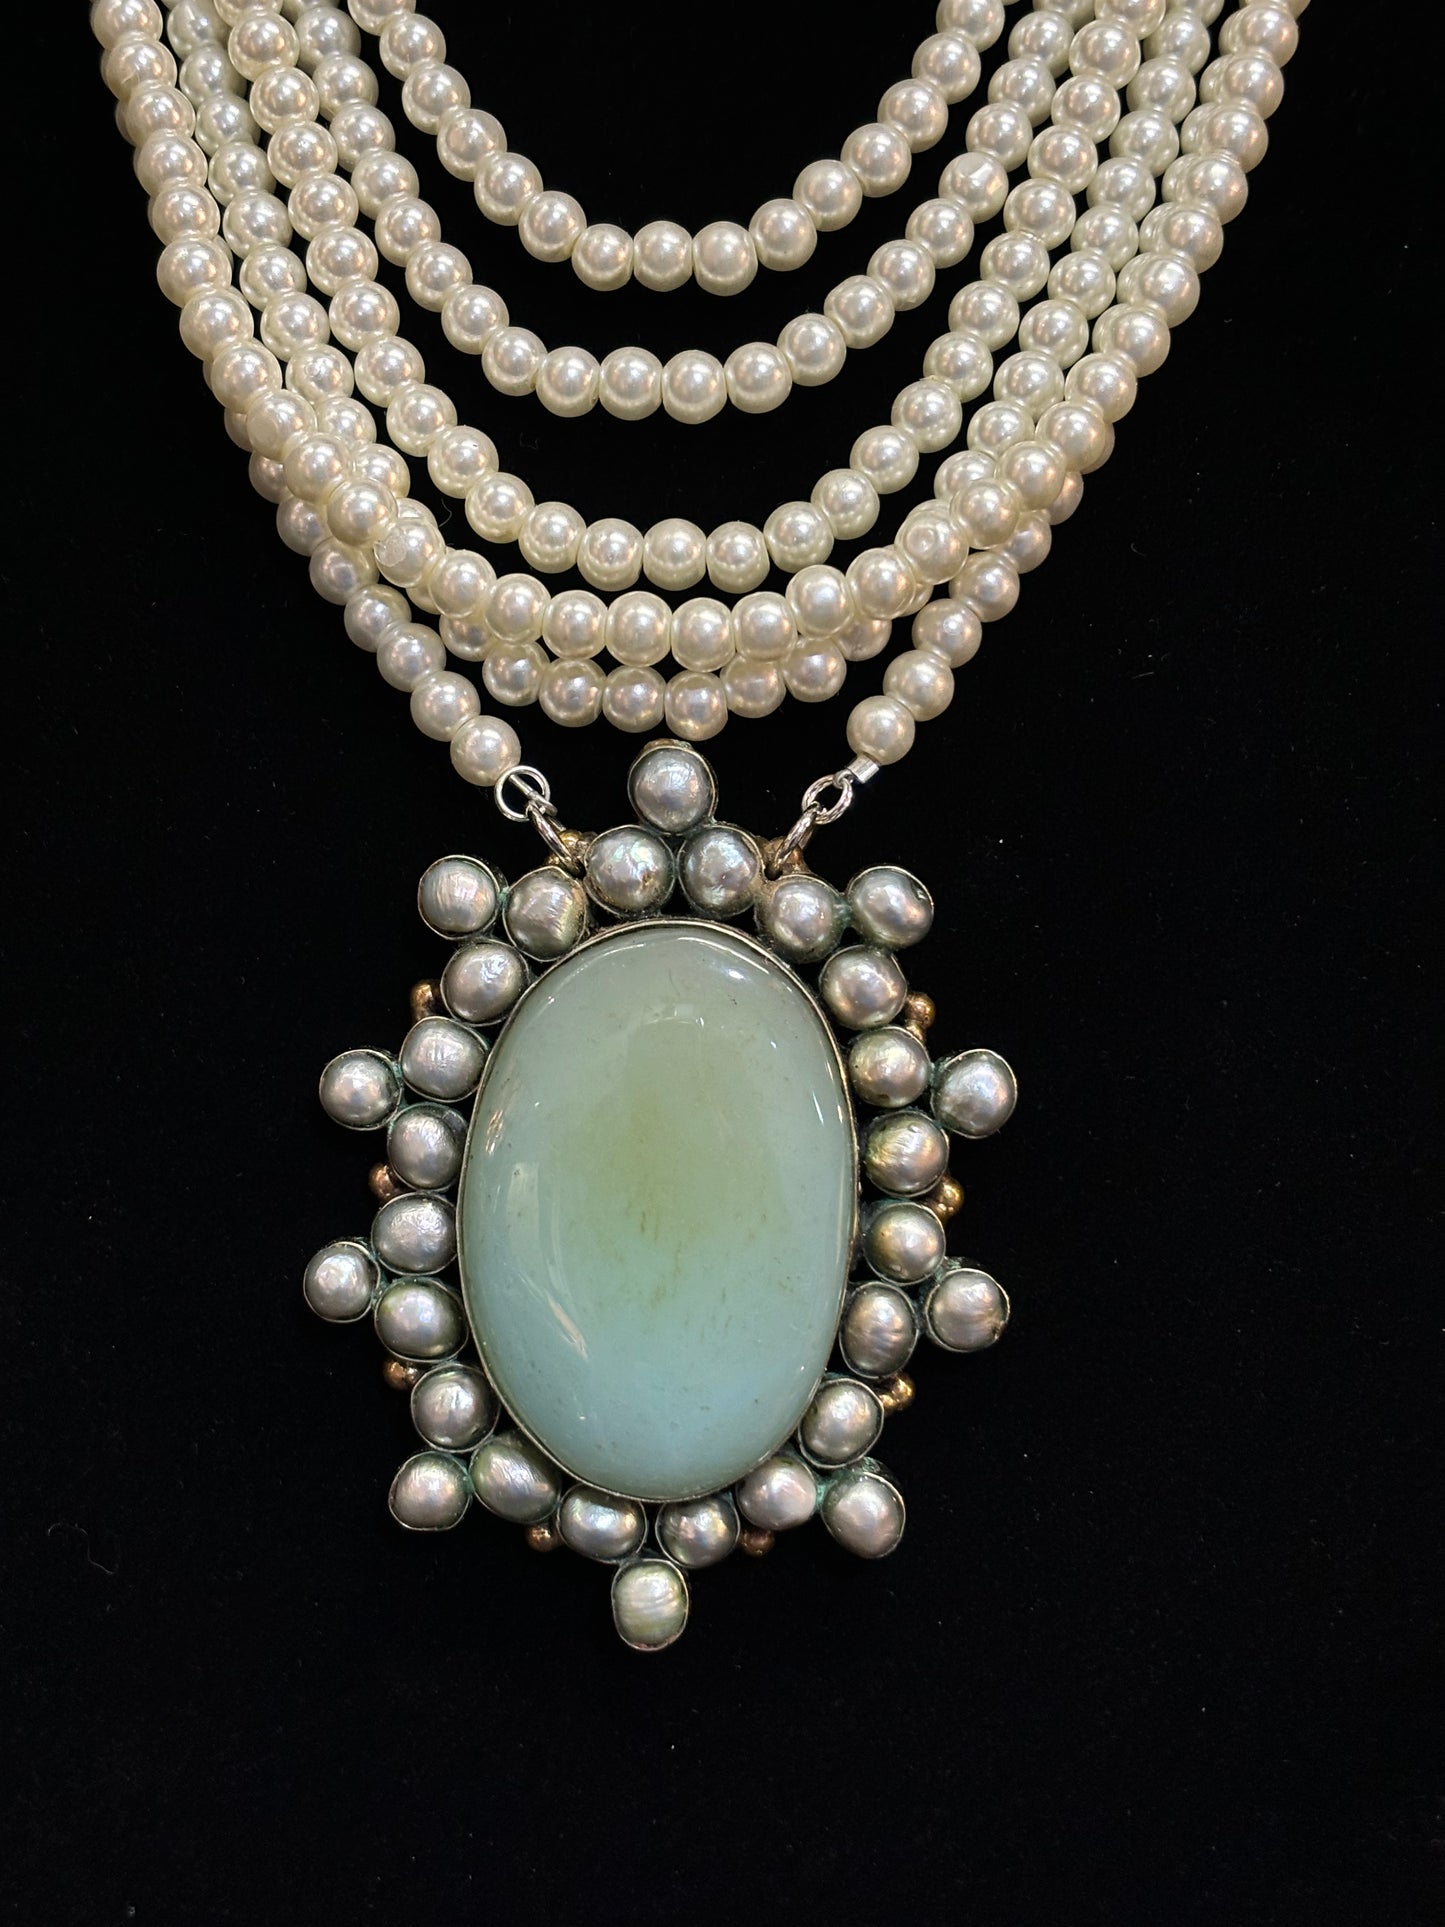 MADE-Layered Pearl Necklace with Stone Brooch